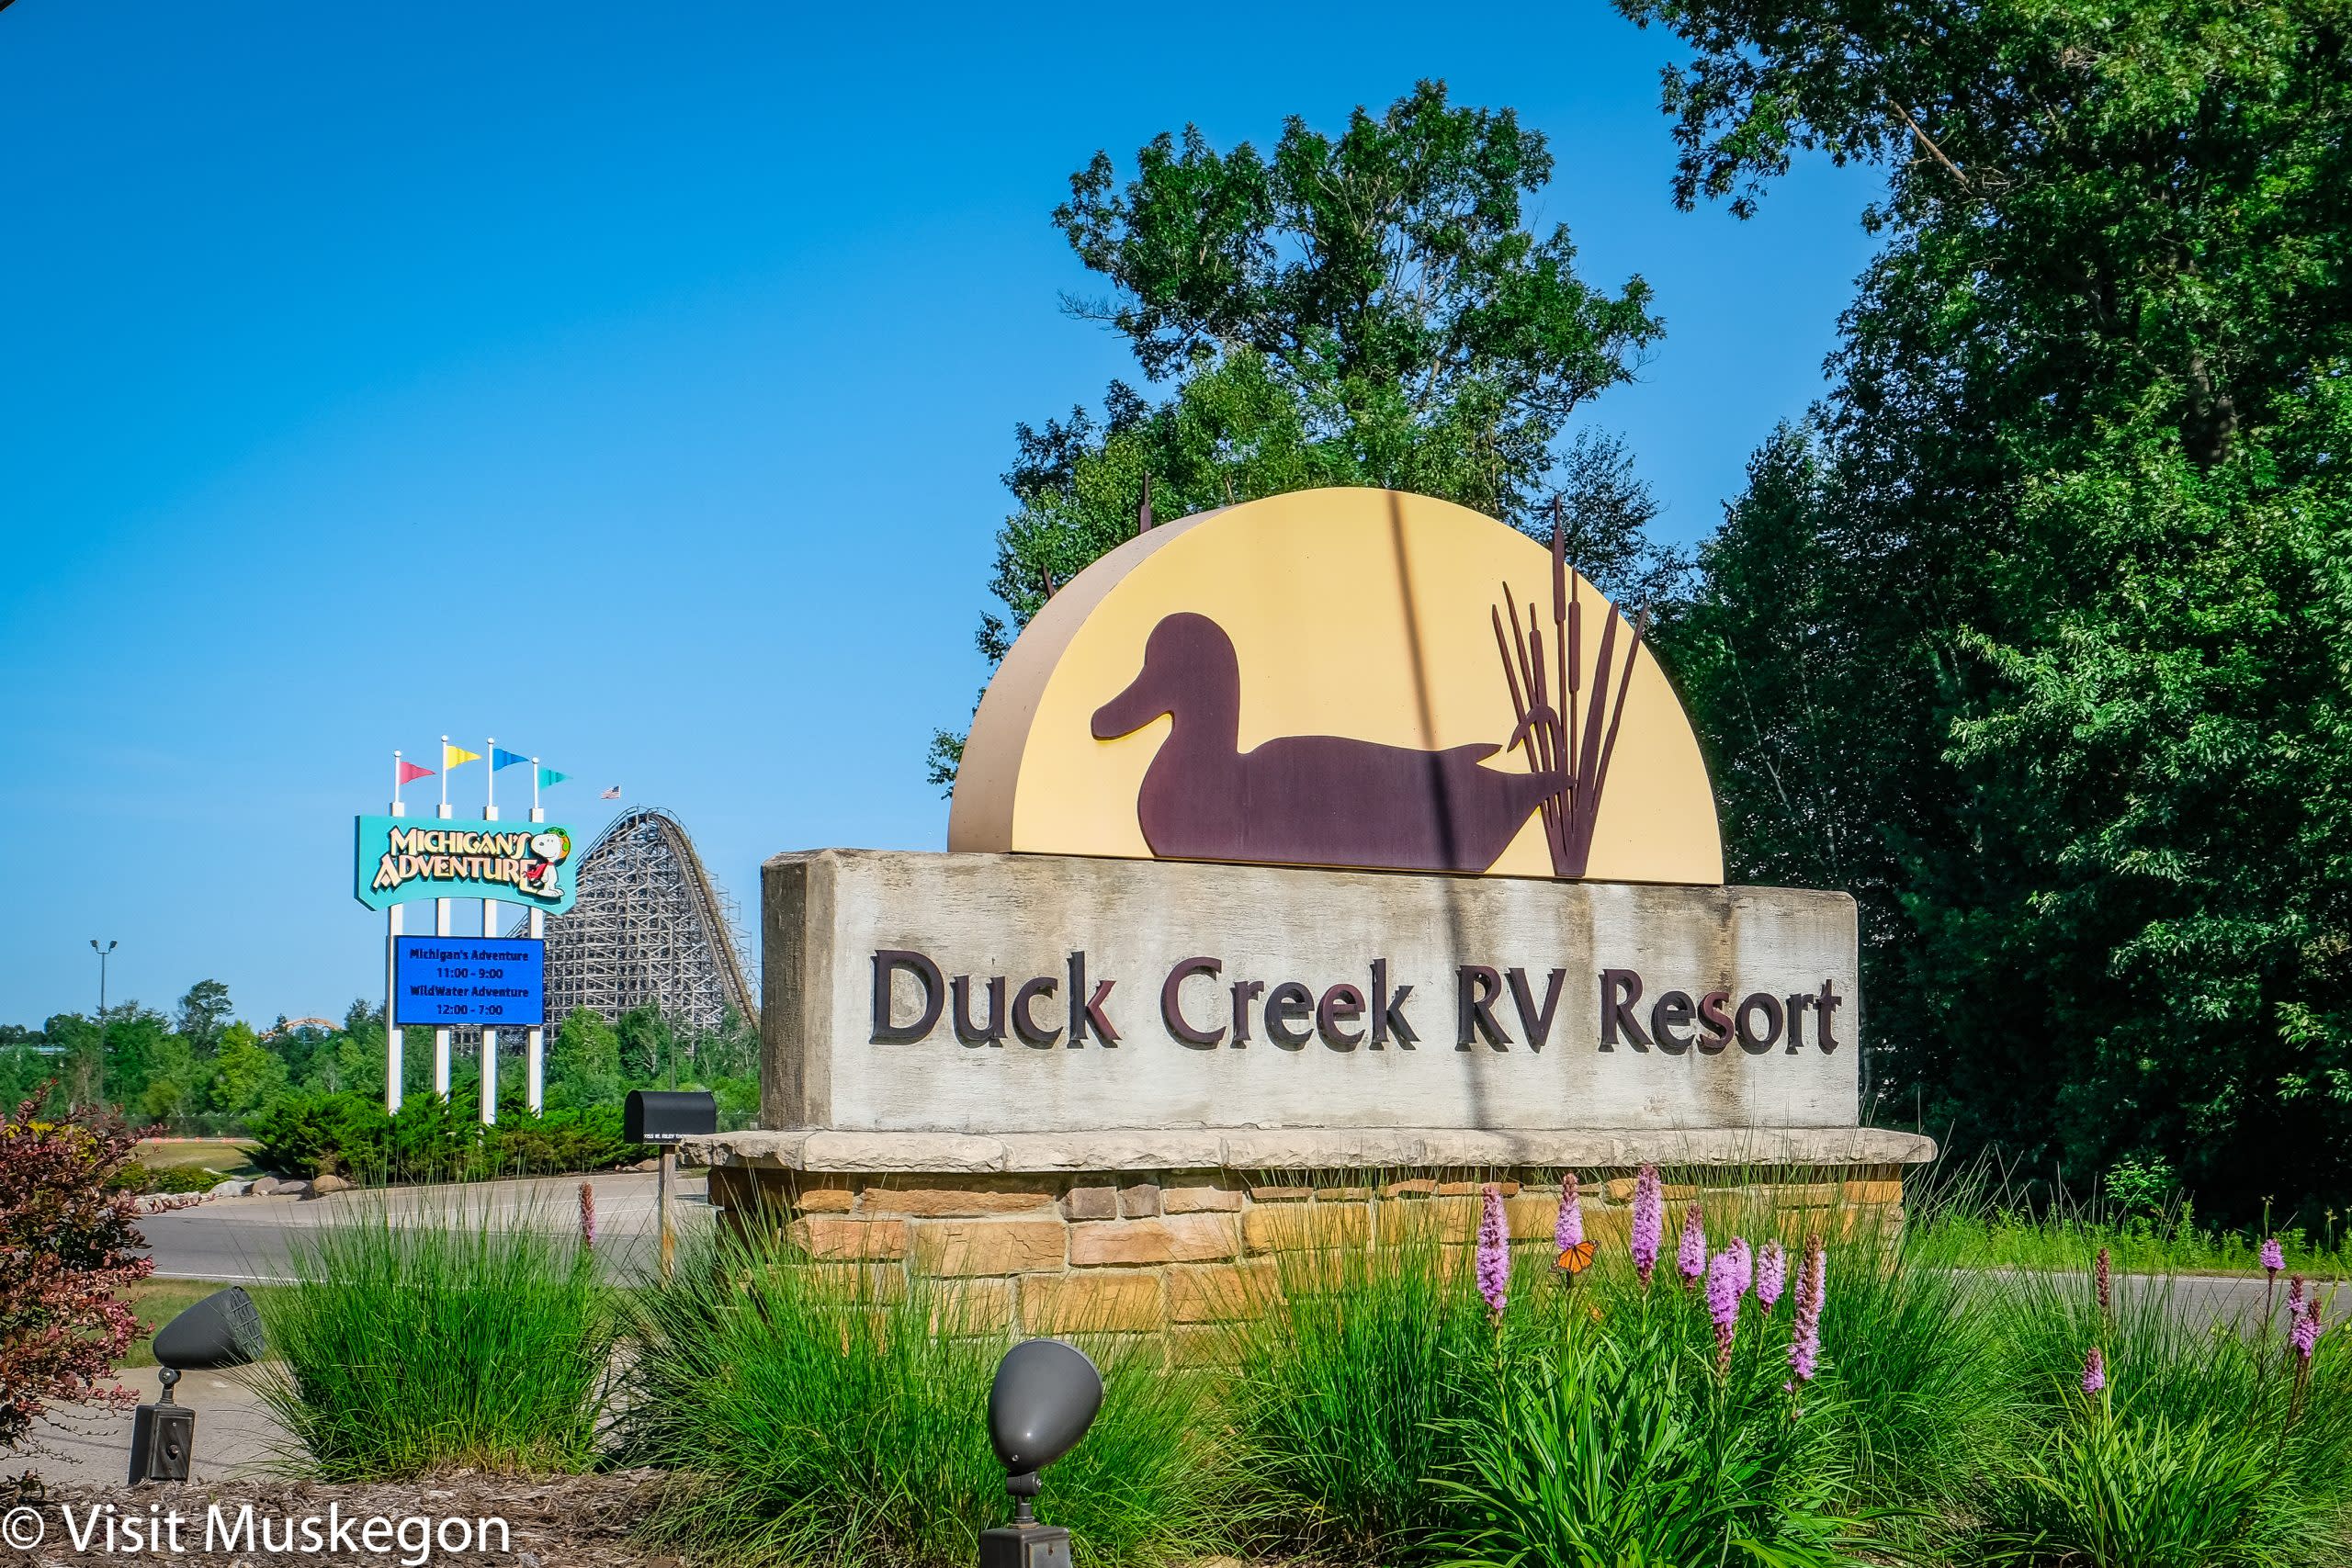 sign for duck creek RV resort sits among flowers, grass and trees. sign for michigans adventure and a rollercoaster are in background